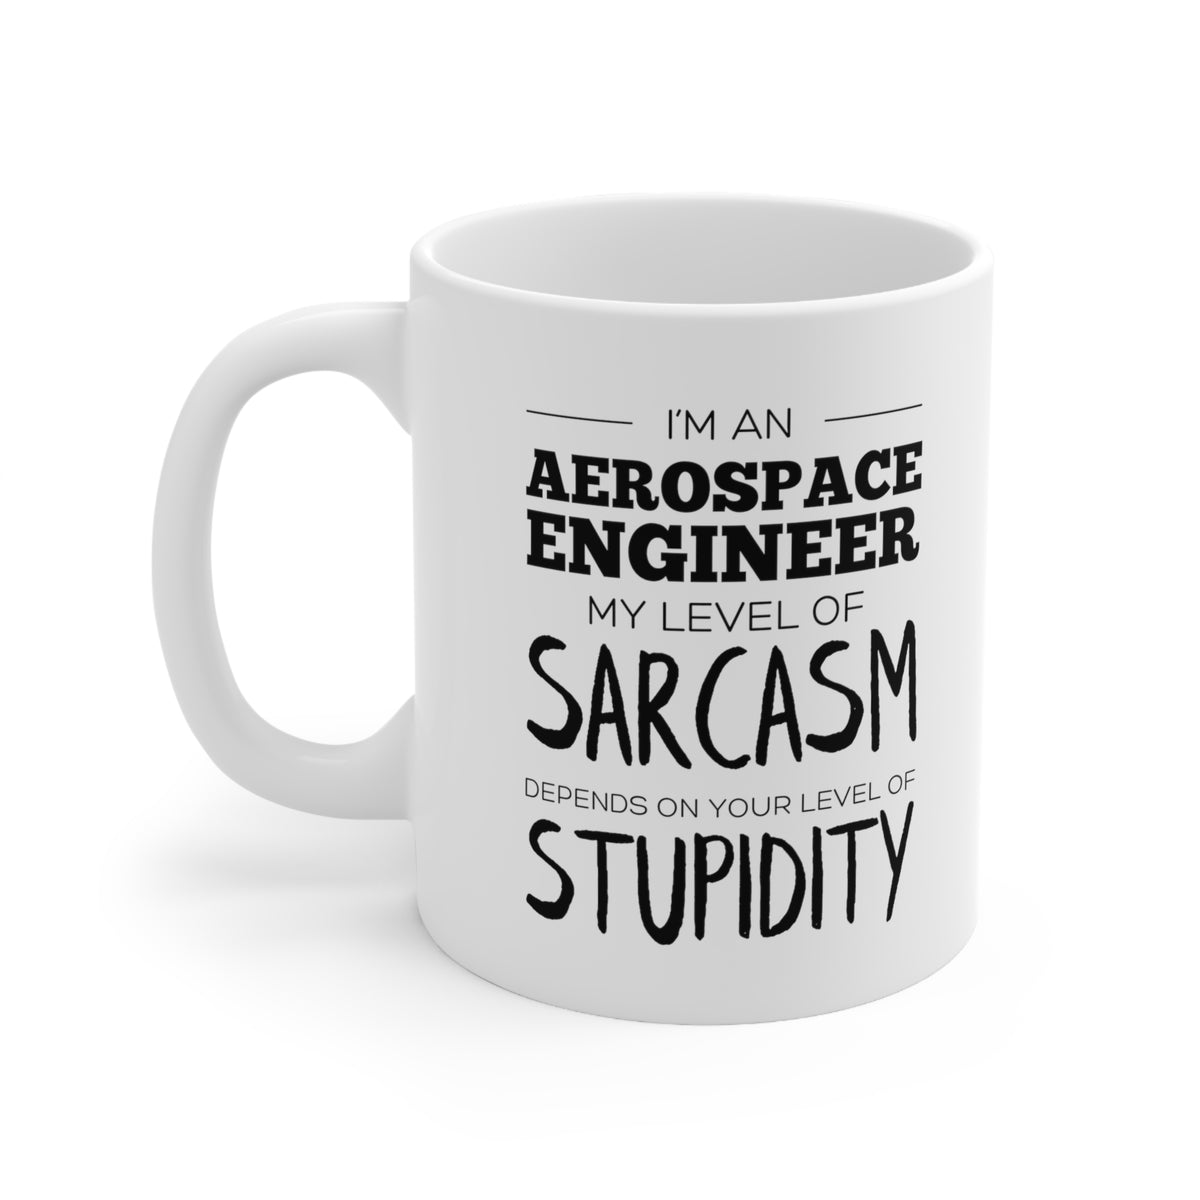 Aerospace Engineer Coffee Mug, My Level Of Sarcasm Depends On Your Level Of Stupidity, Funny Sarcastic Christmas Cup For Men Women Friends Coworker